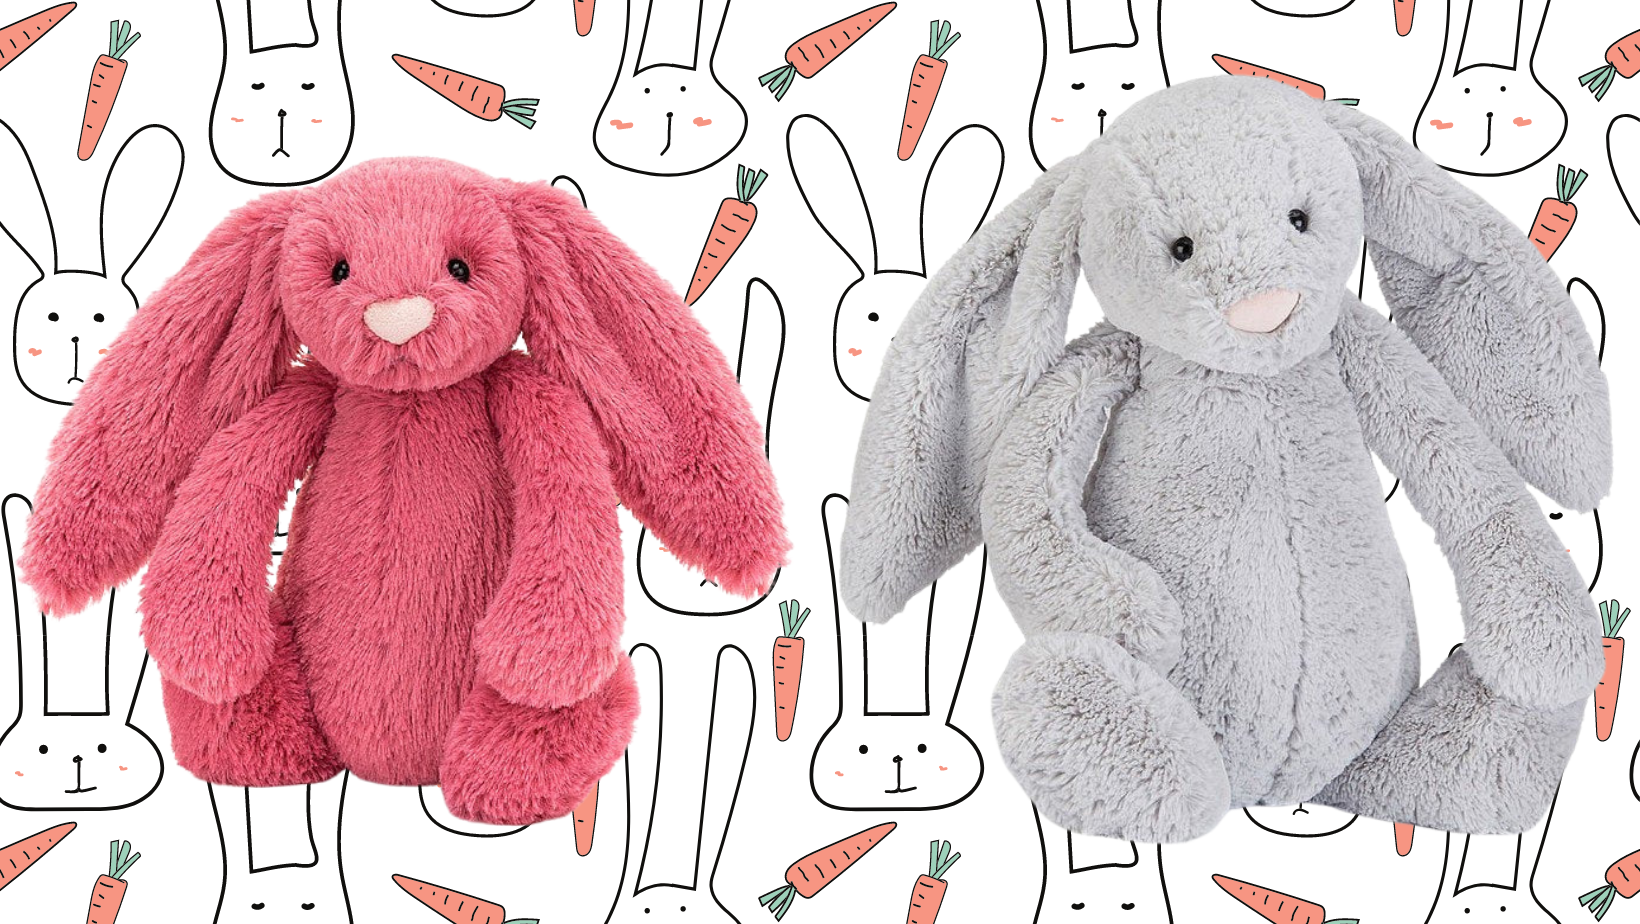 Jellycat Cerise and Silver Bunnies